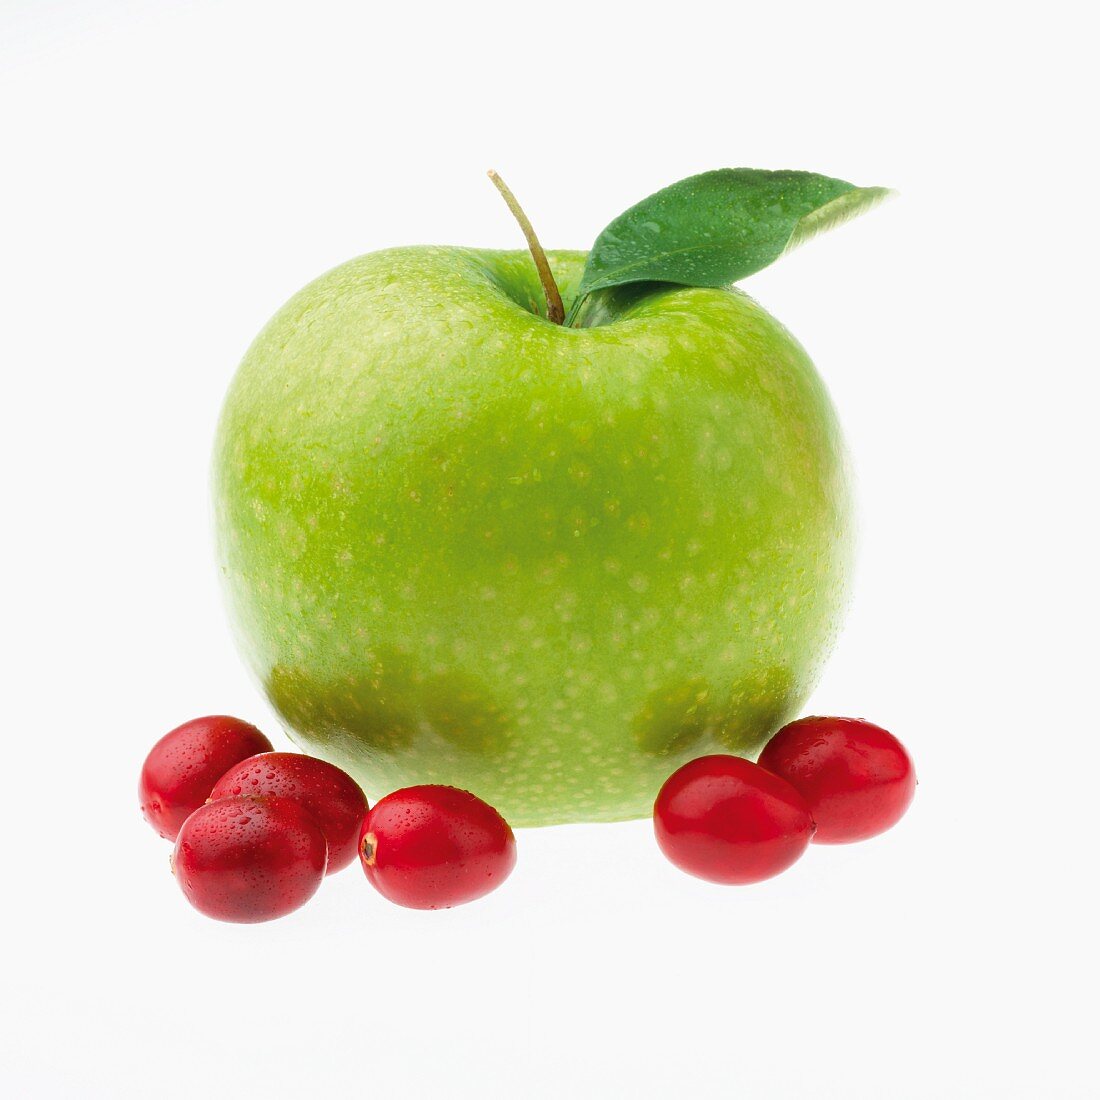 Cranberries and green apple